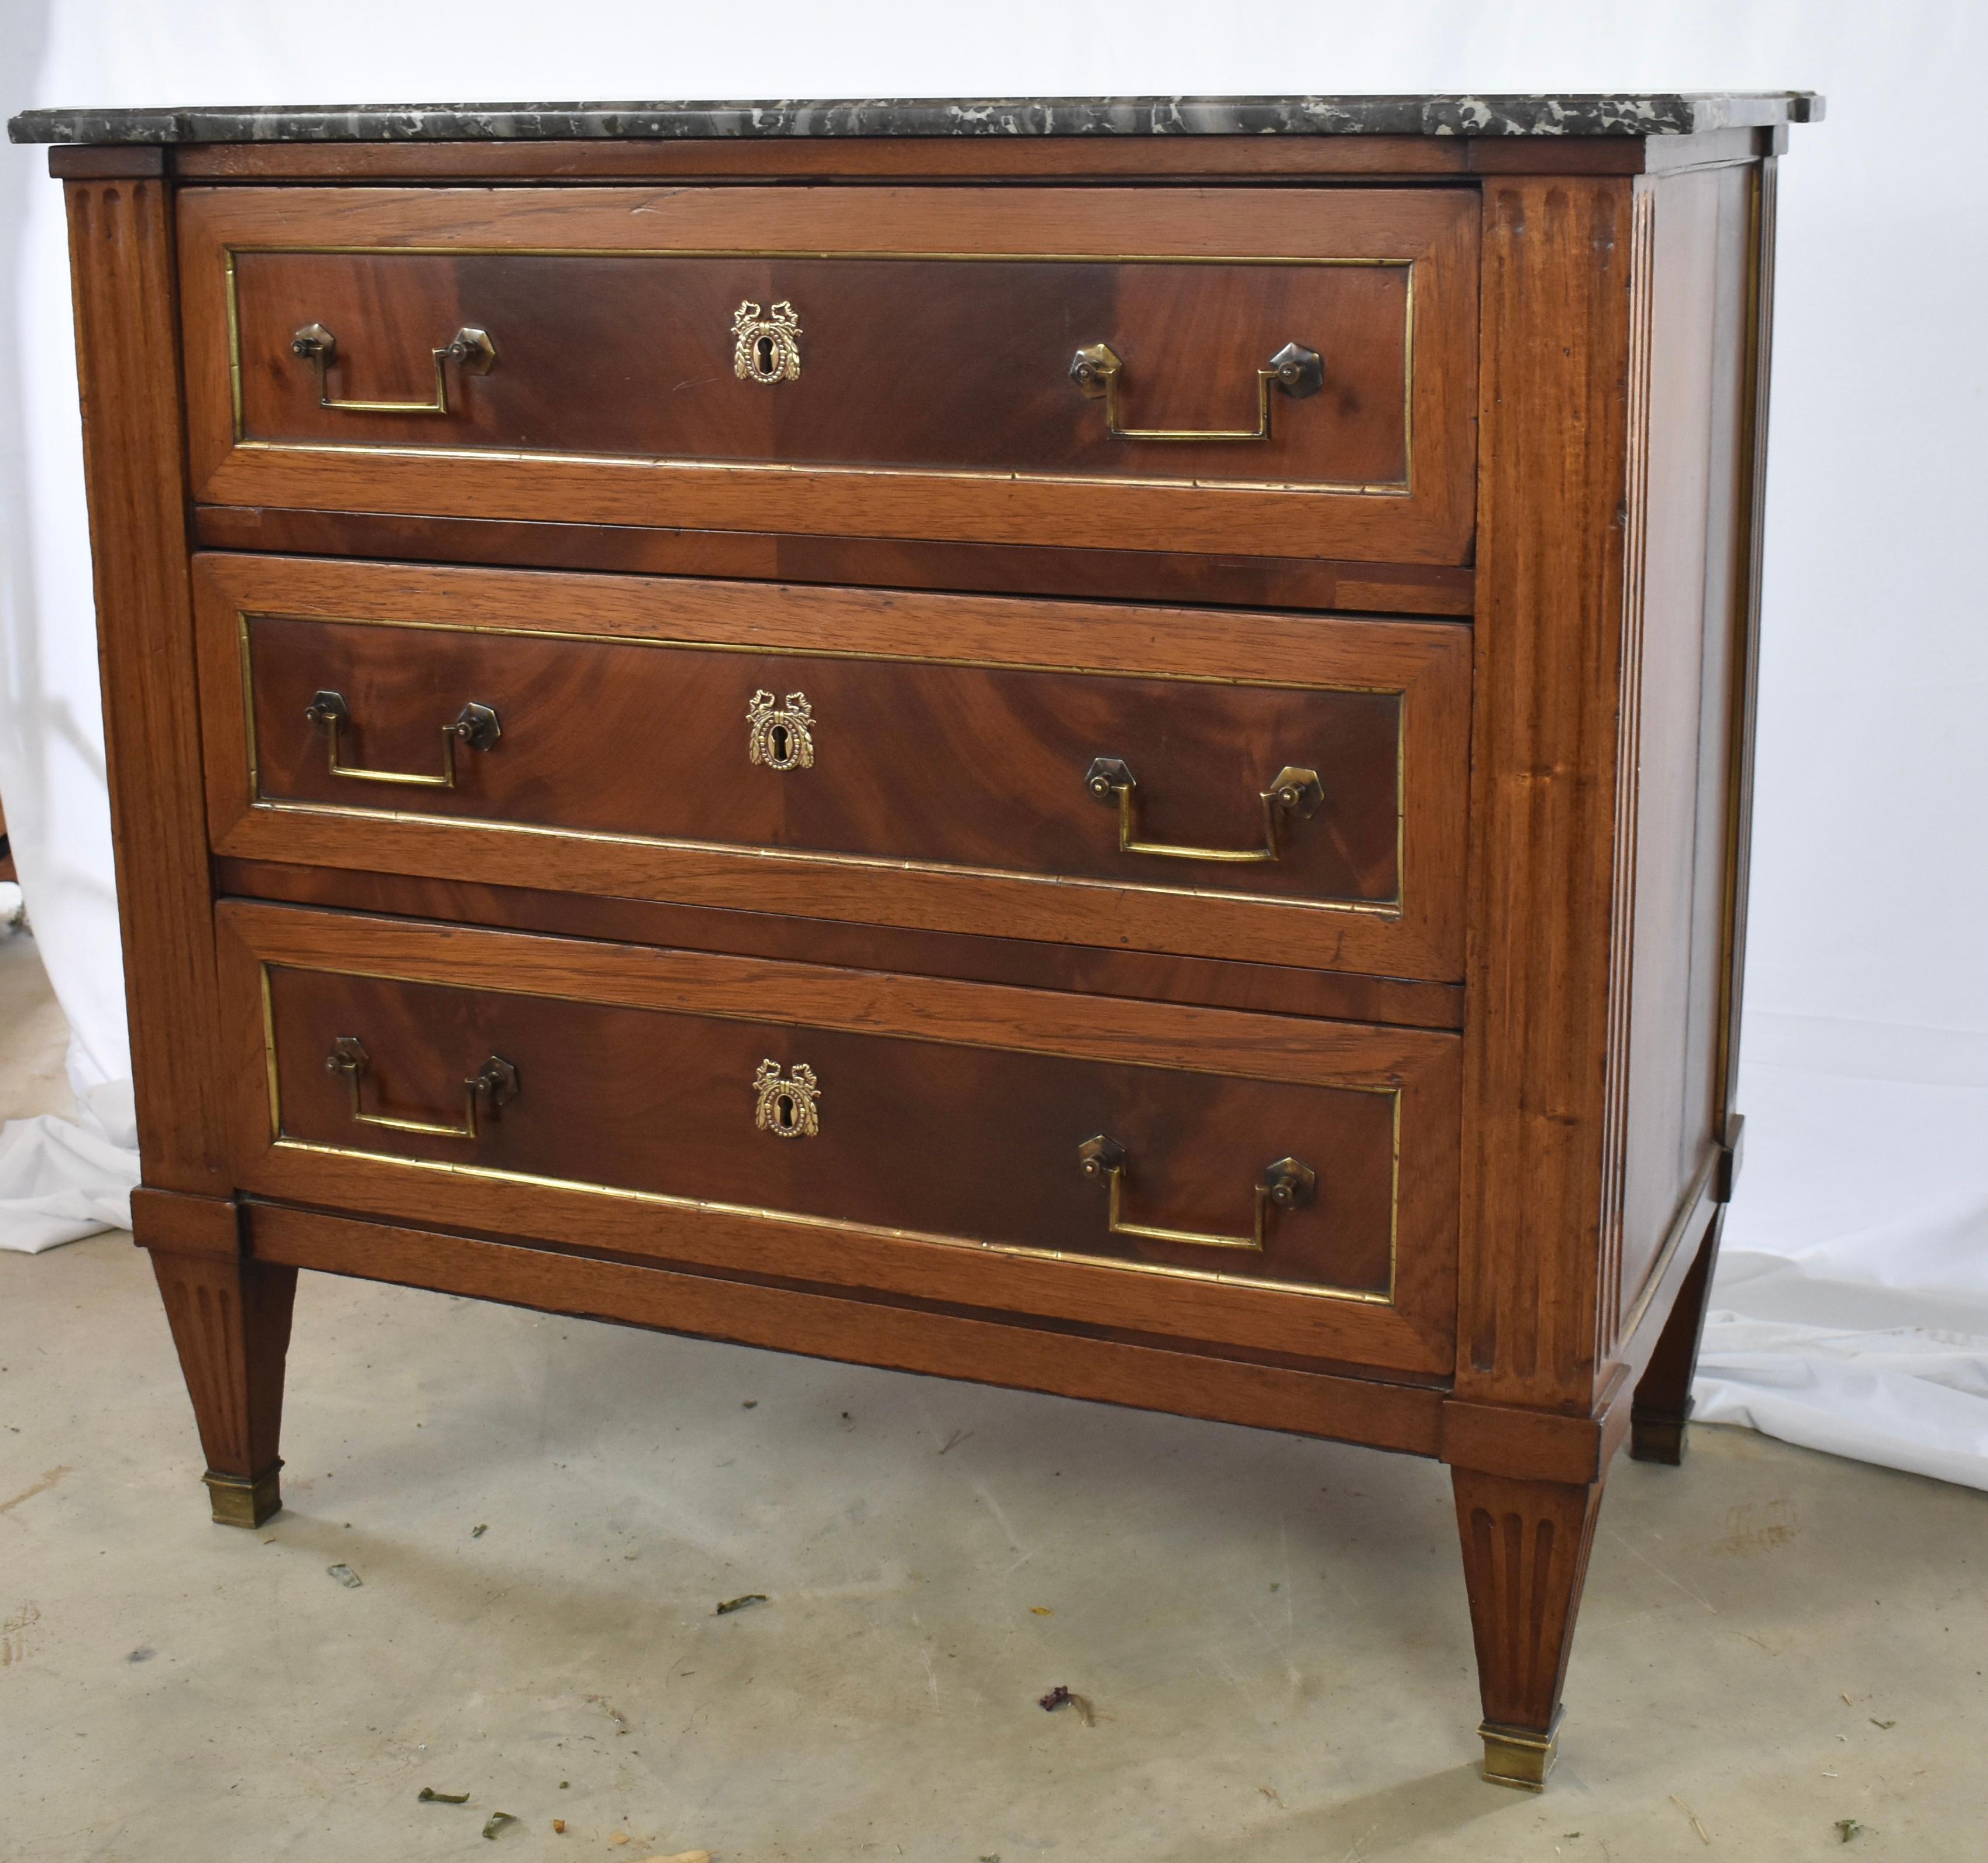 This is an absolutely gorgeous Louis XVI commode built in France in the early 1800s using mahogany and oak for the secondary wood. The chest features three drawers each decorated by book-matched veneer framed by molding and a brass trim. The case